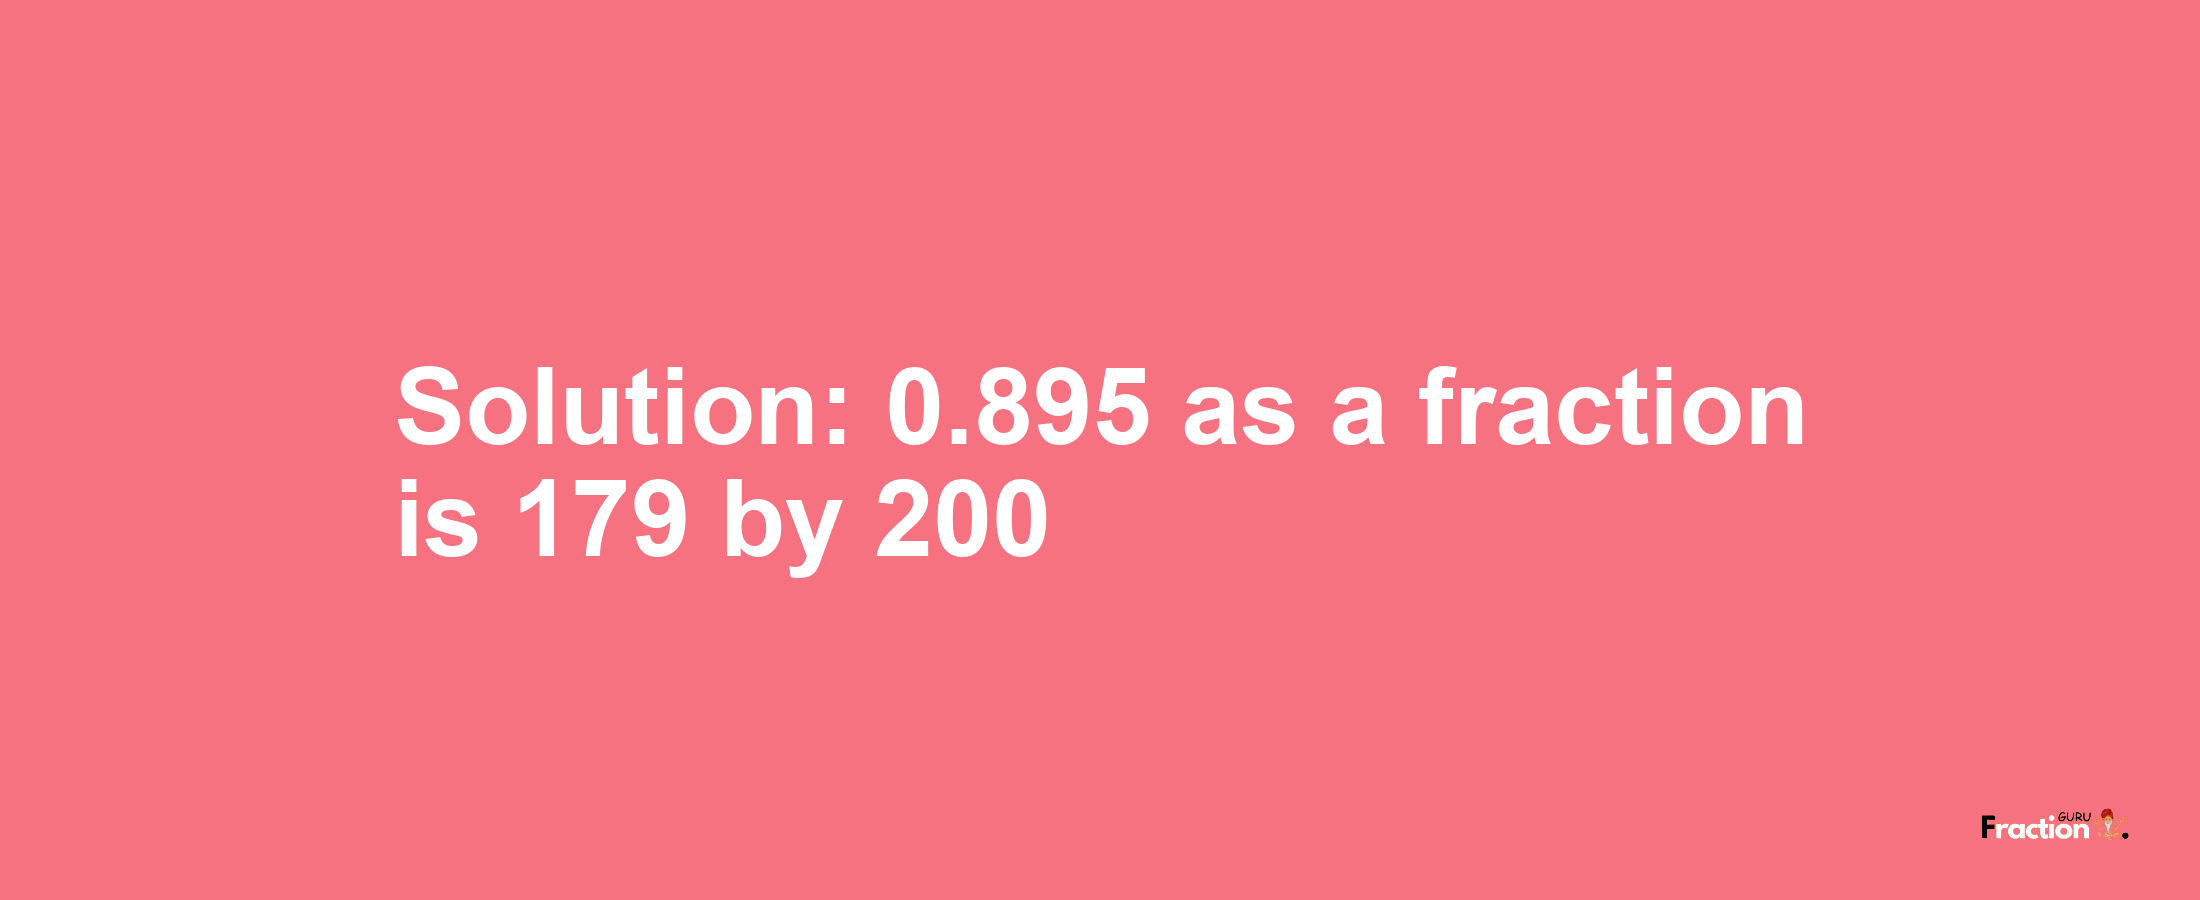 Solution:0.895 as a fraction is 179/200